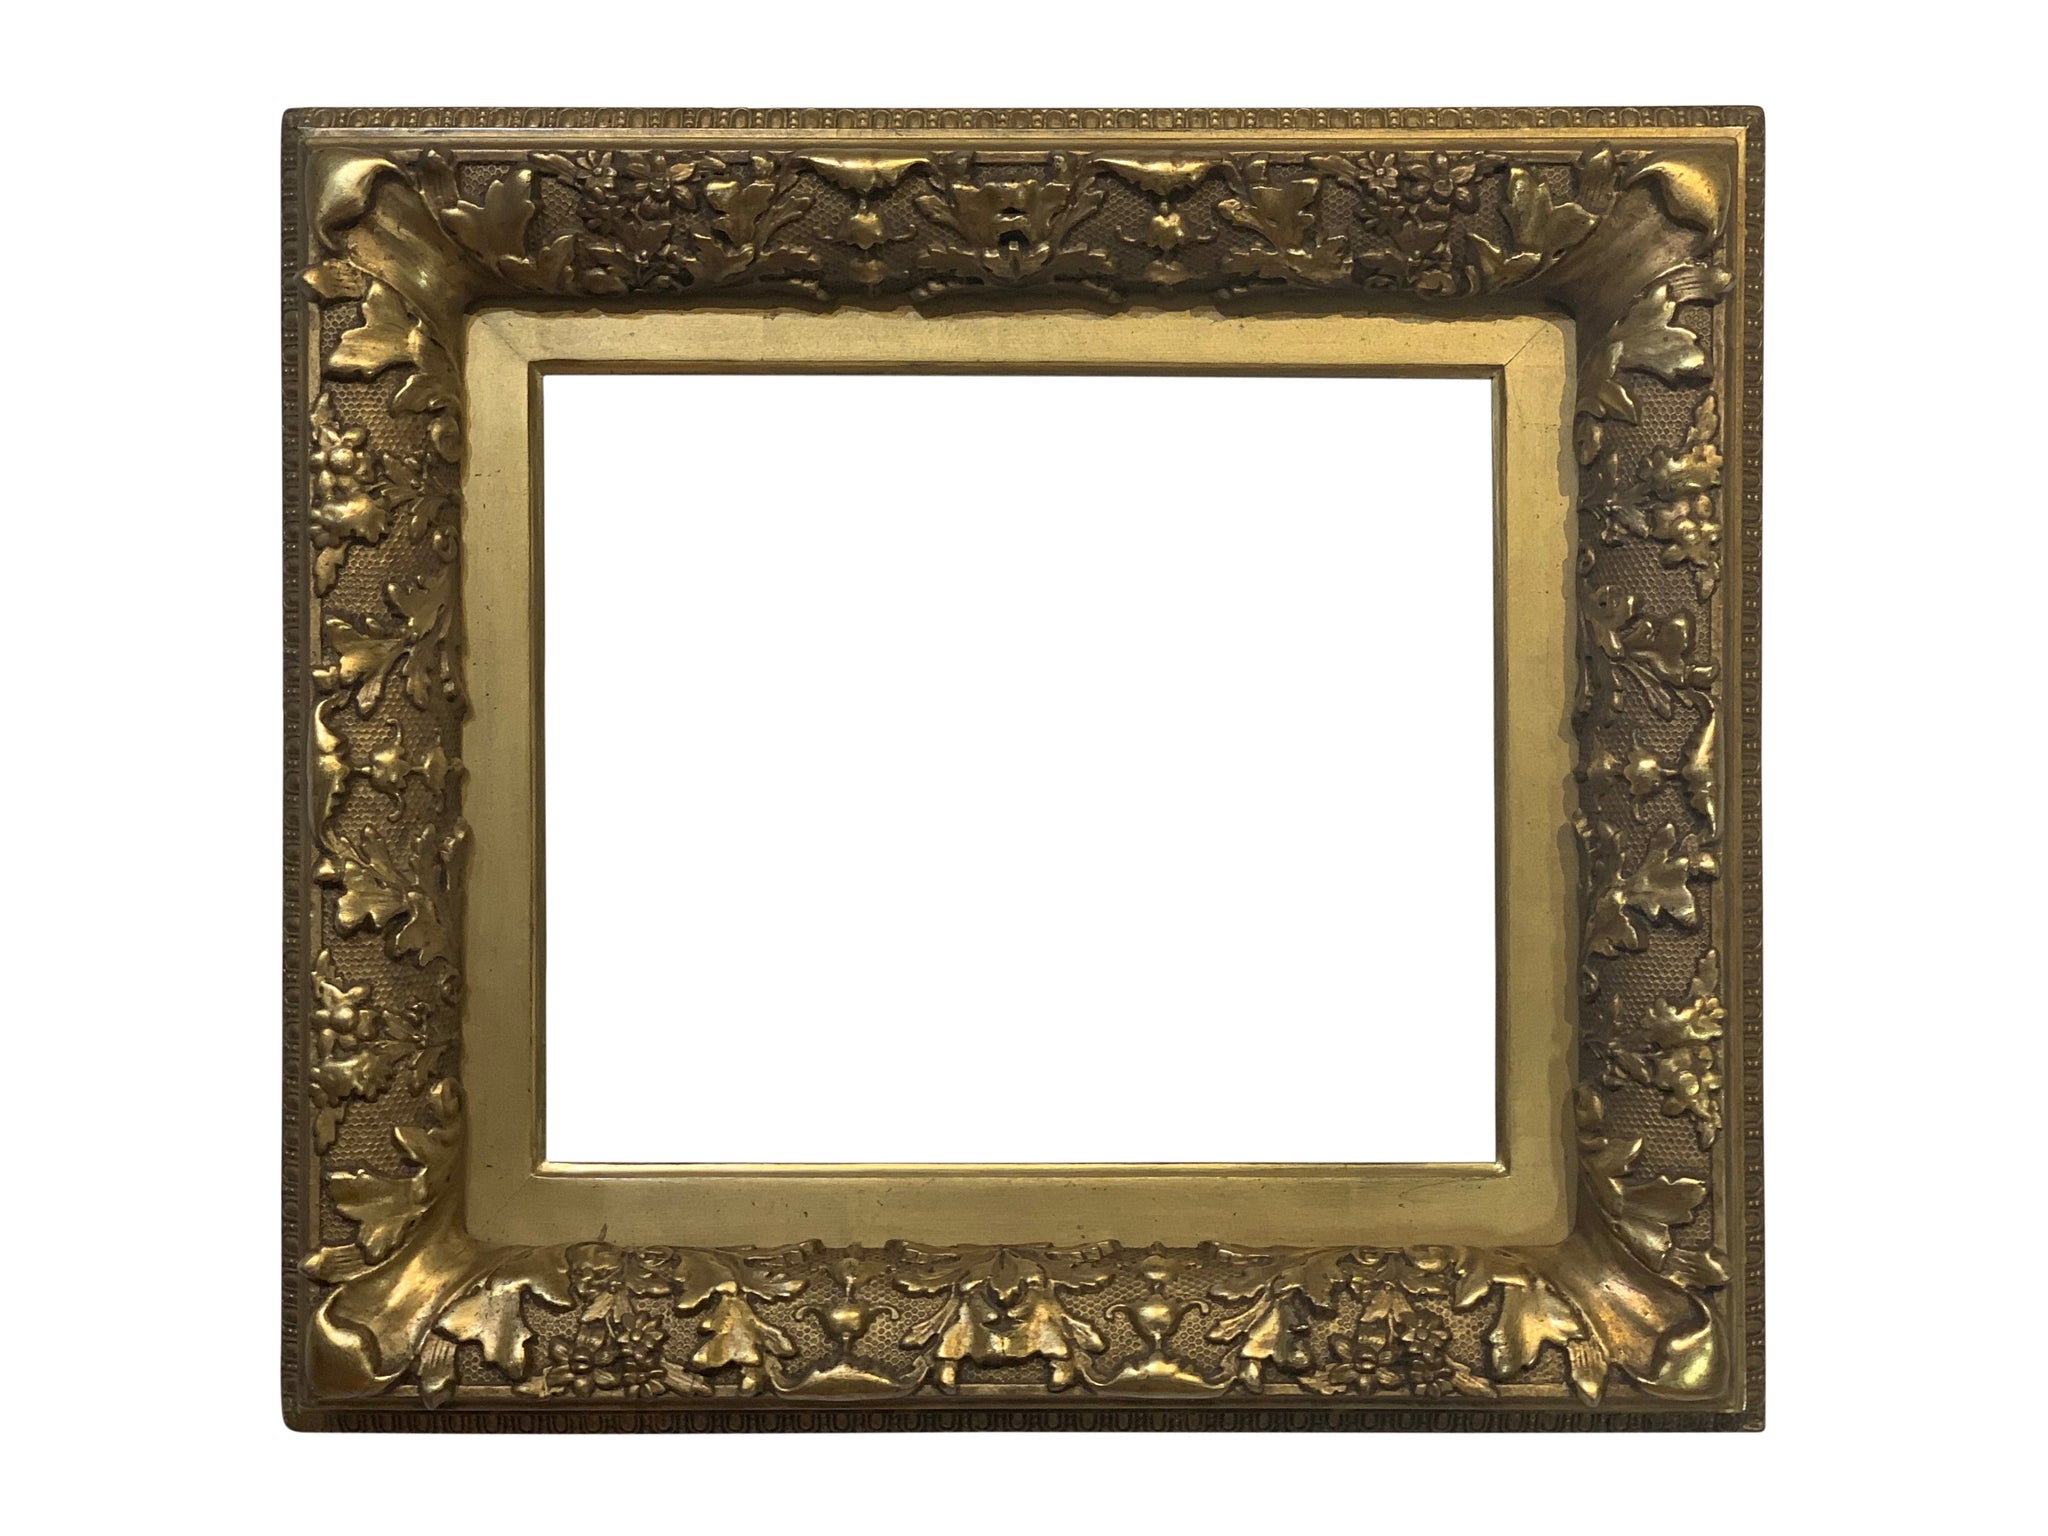 10x13 inch Vintage Gold Art Nouveau Picture Frame For Canvas Art circa 1900s (20th century American).